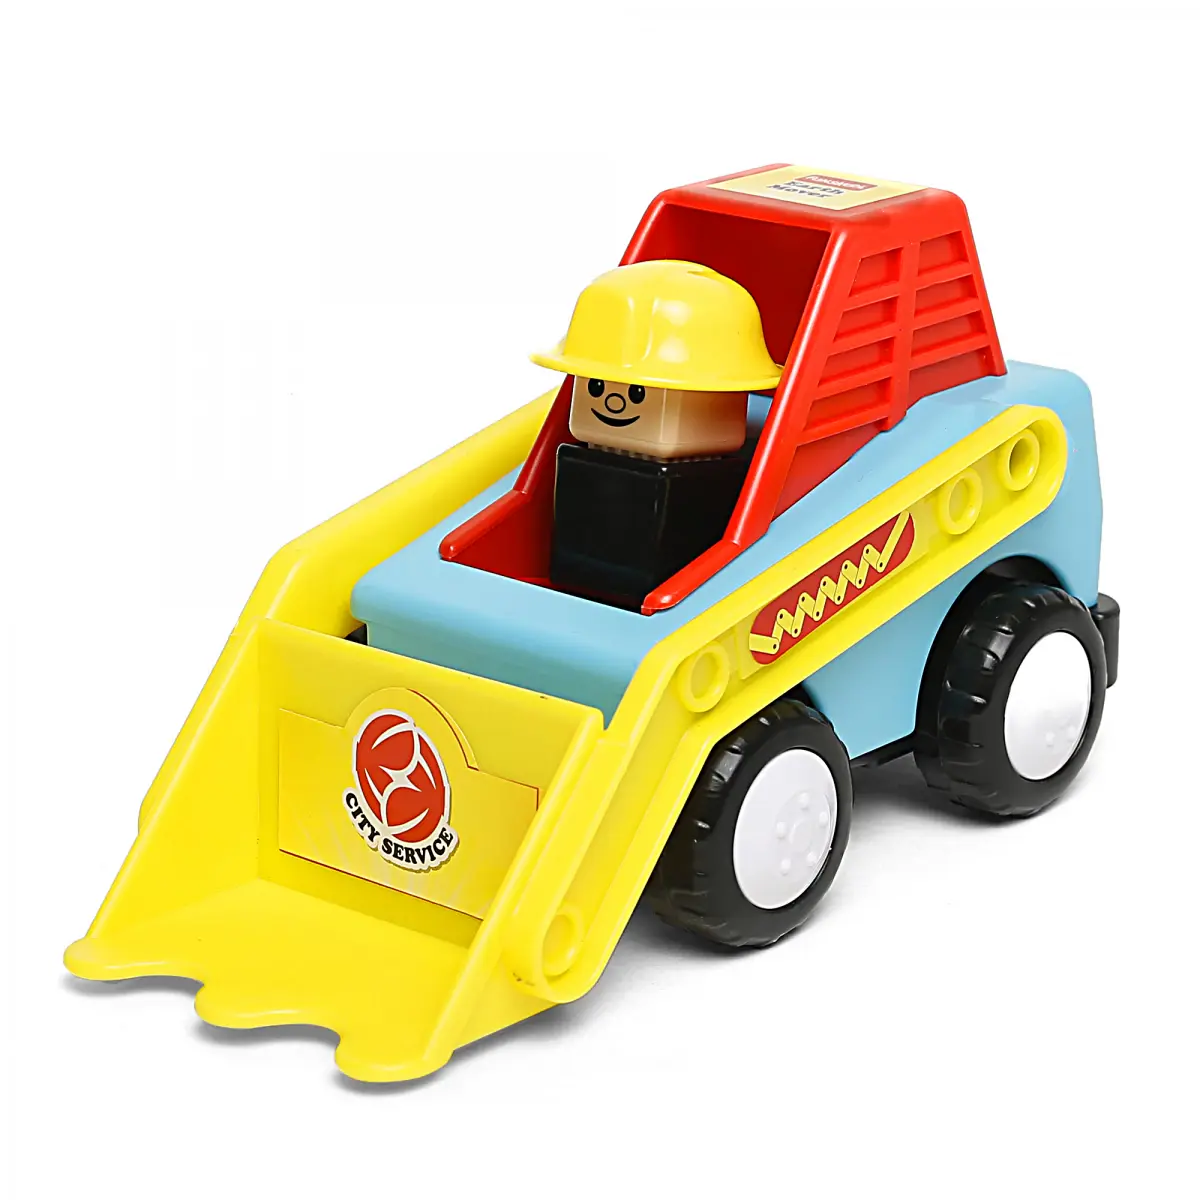 Giggles Earth Mover Vehicle Toys, 18M+, Multicolour